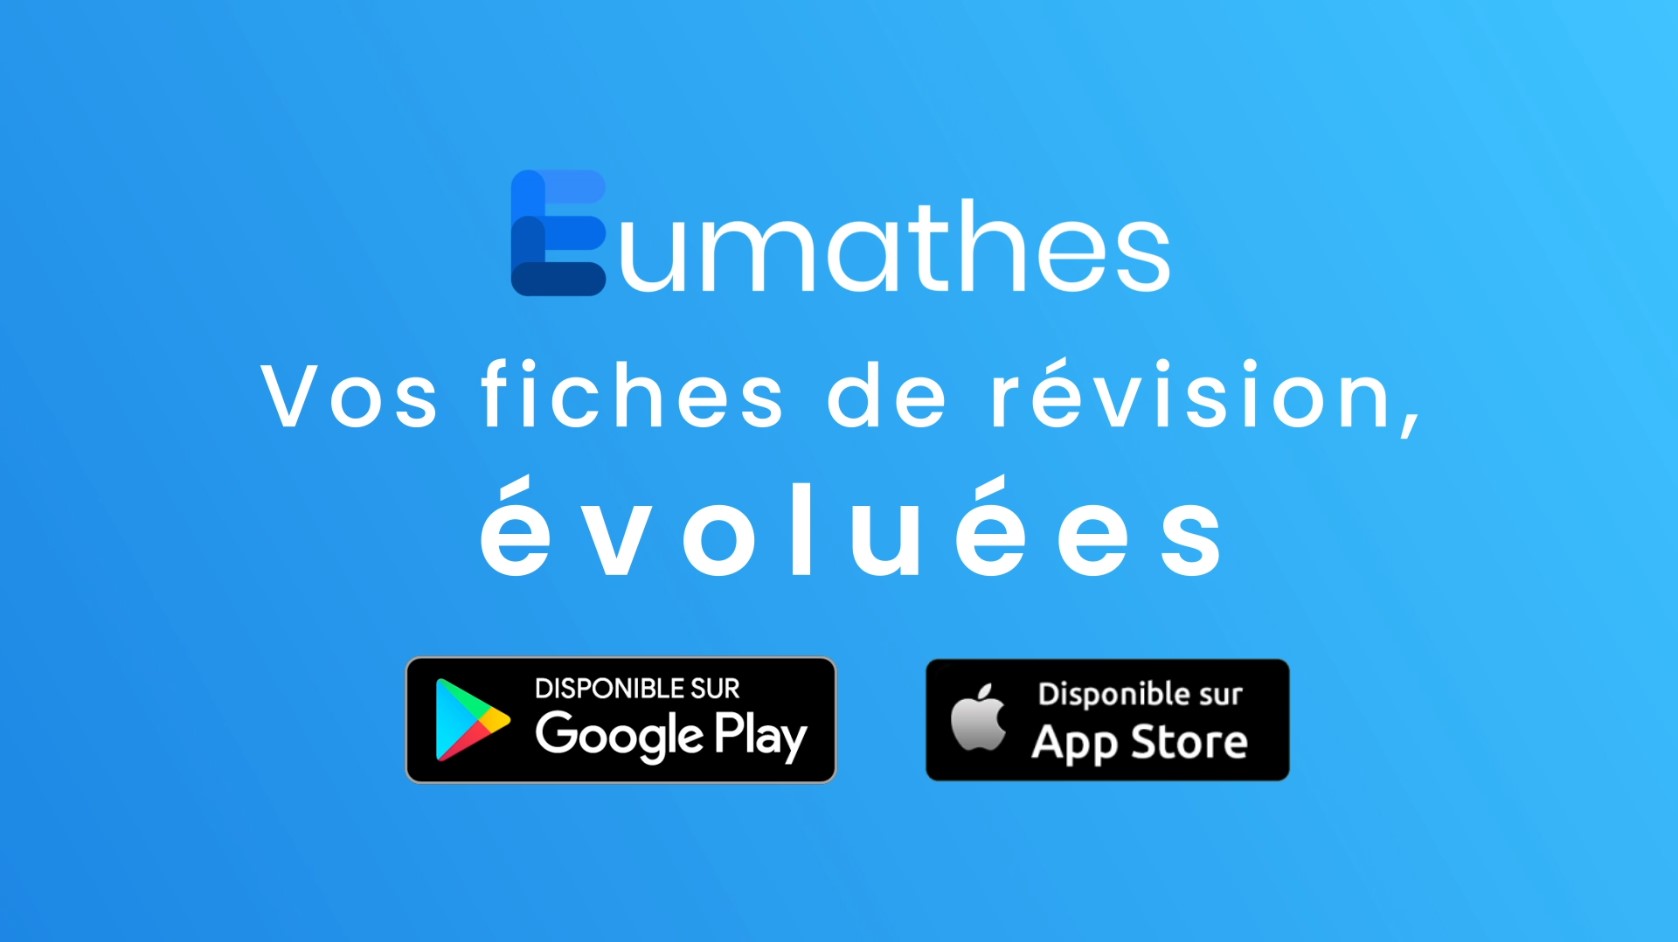 What is Eumathes?